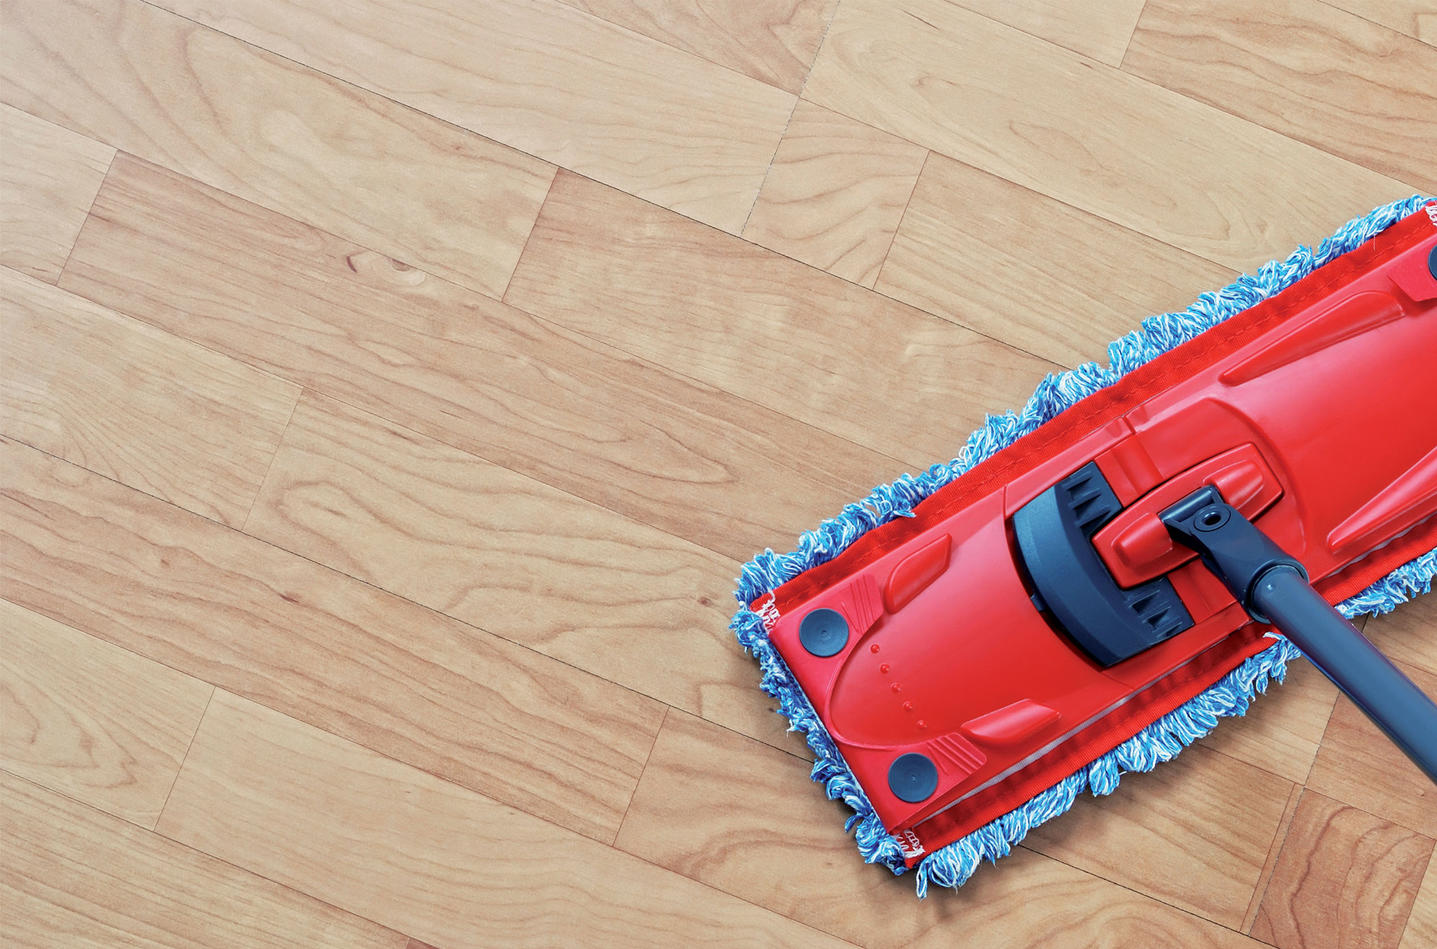 How To Clean Vinyl Floors Tarkett, What Can I Wash My Vinyl Plank Flooring With